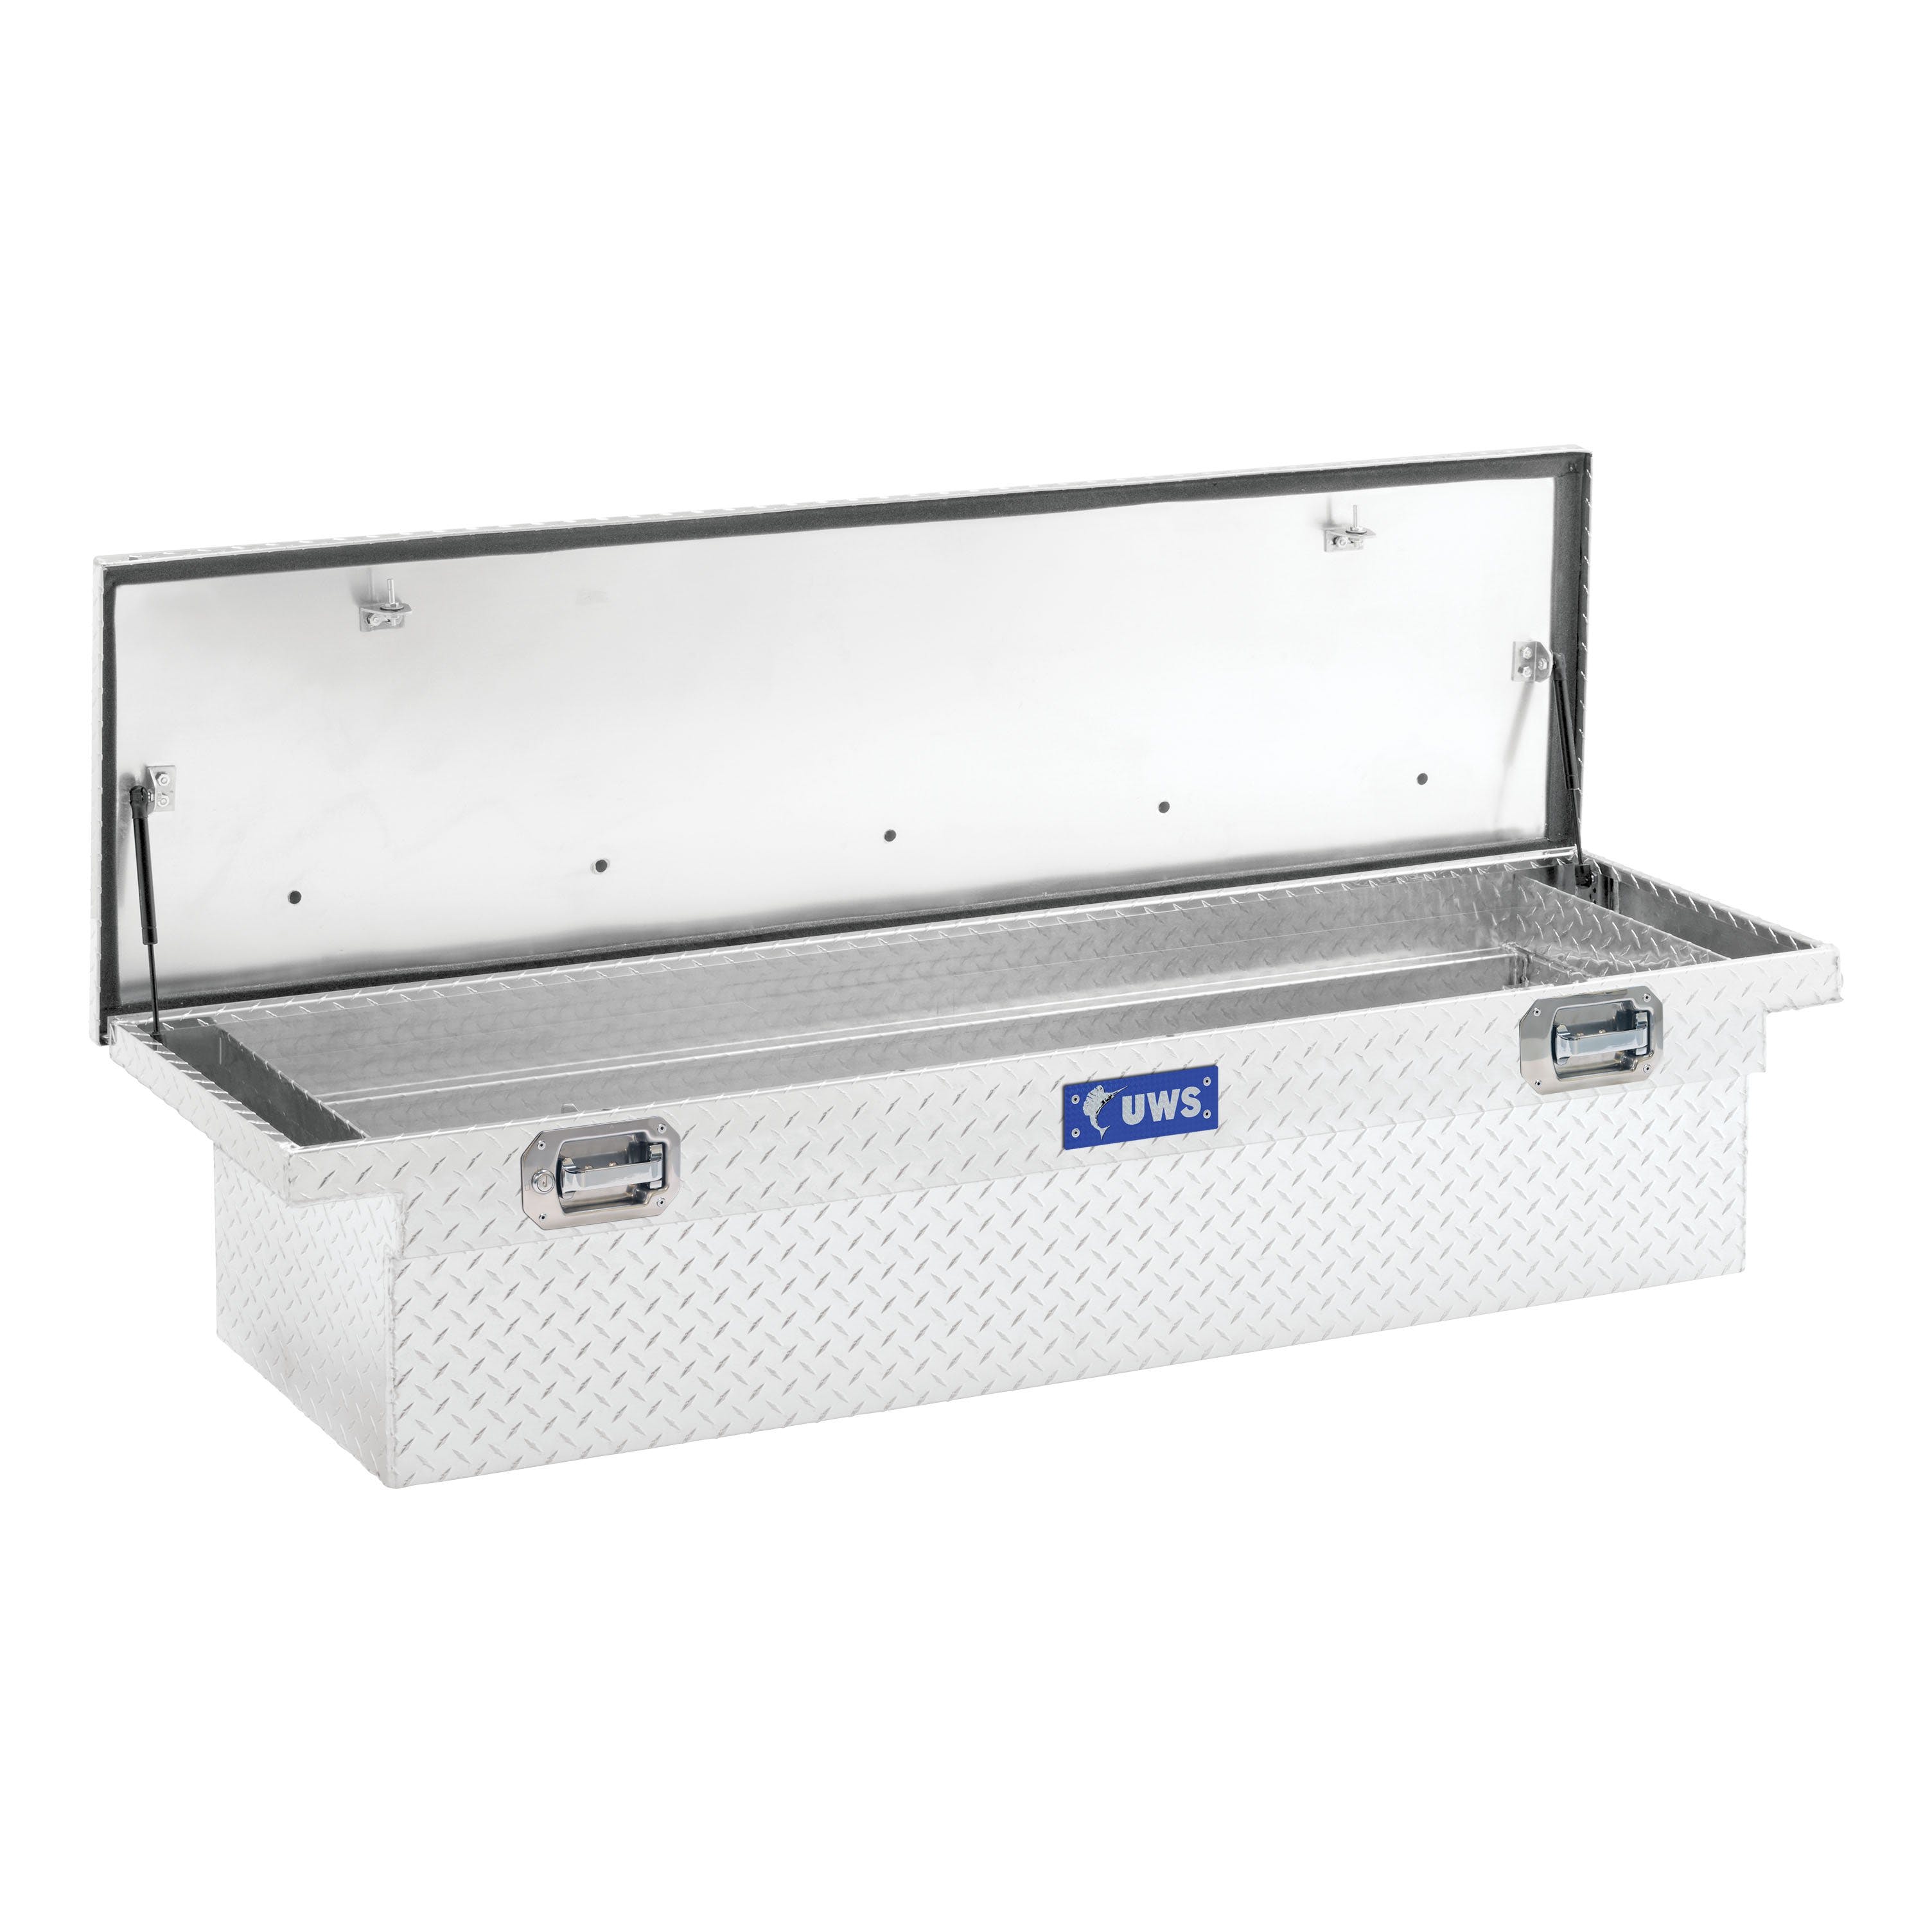 UWS TBS-72-LP-PH 72 inch Aluminum Single Lid Crossover Toolbox Pull Handle Low Profile